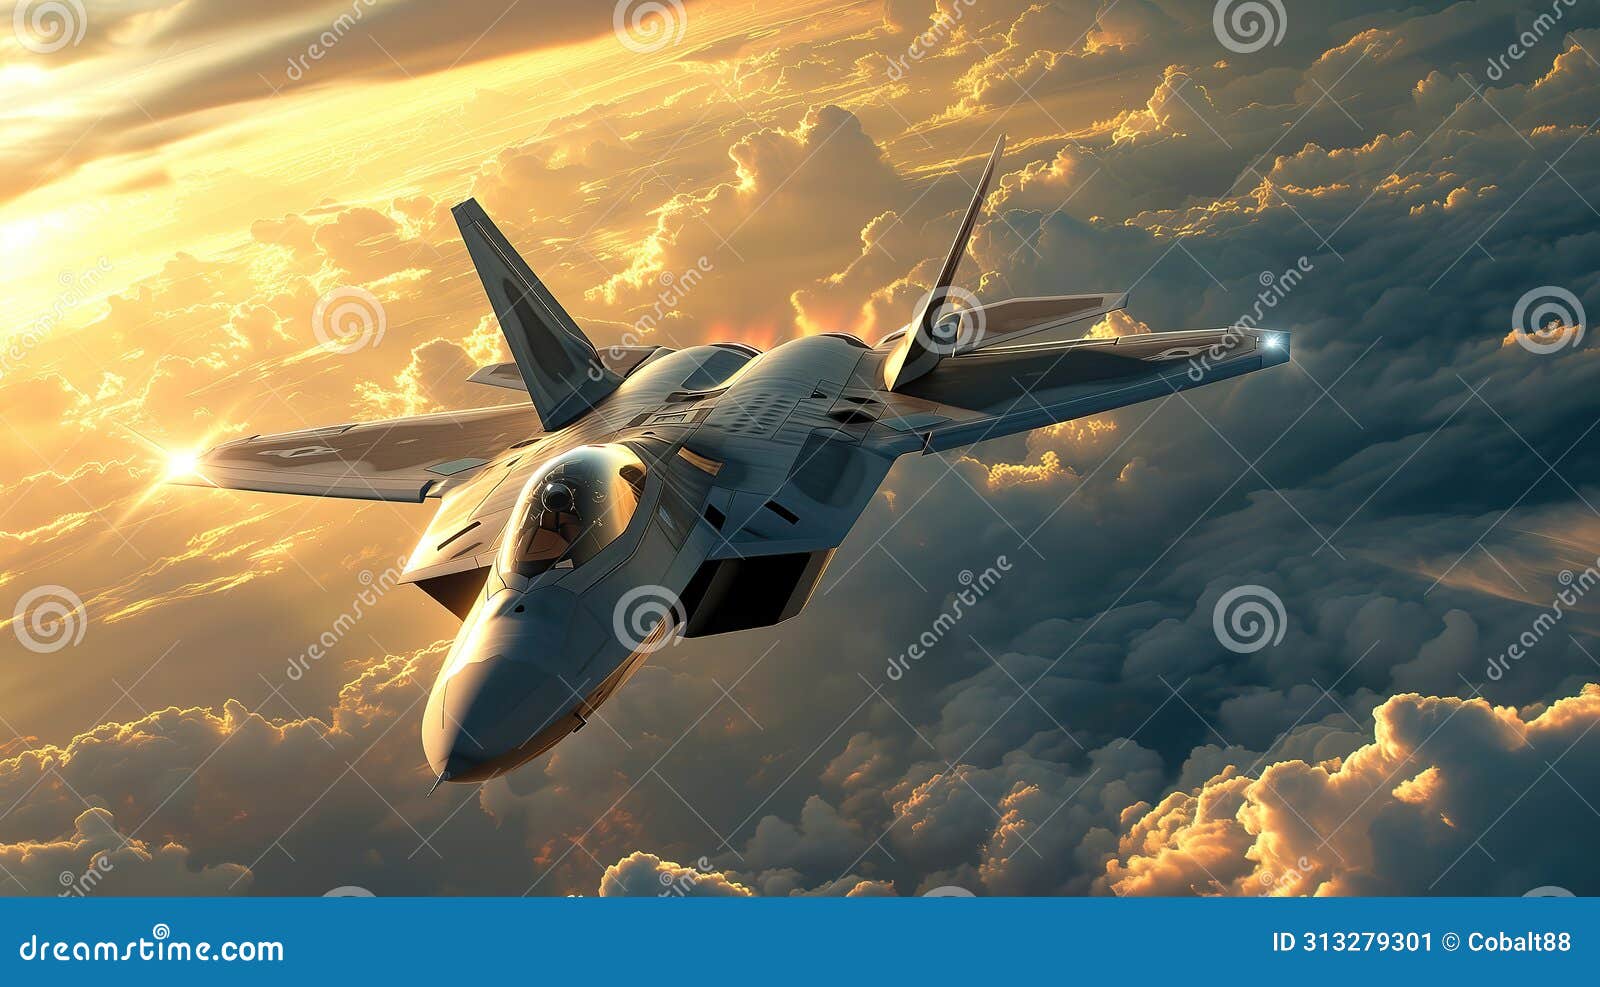 modern jetfighter at high speed flying above the clouds